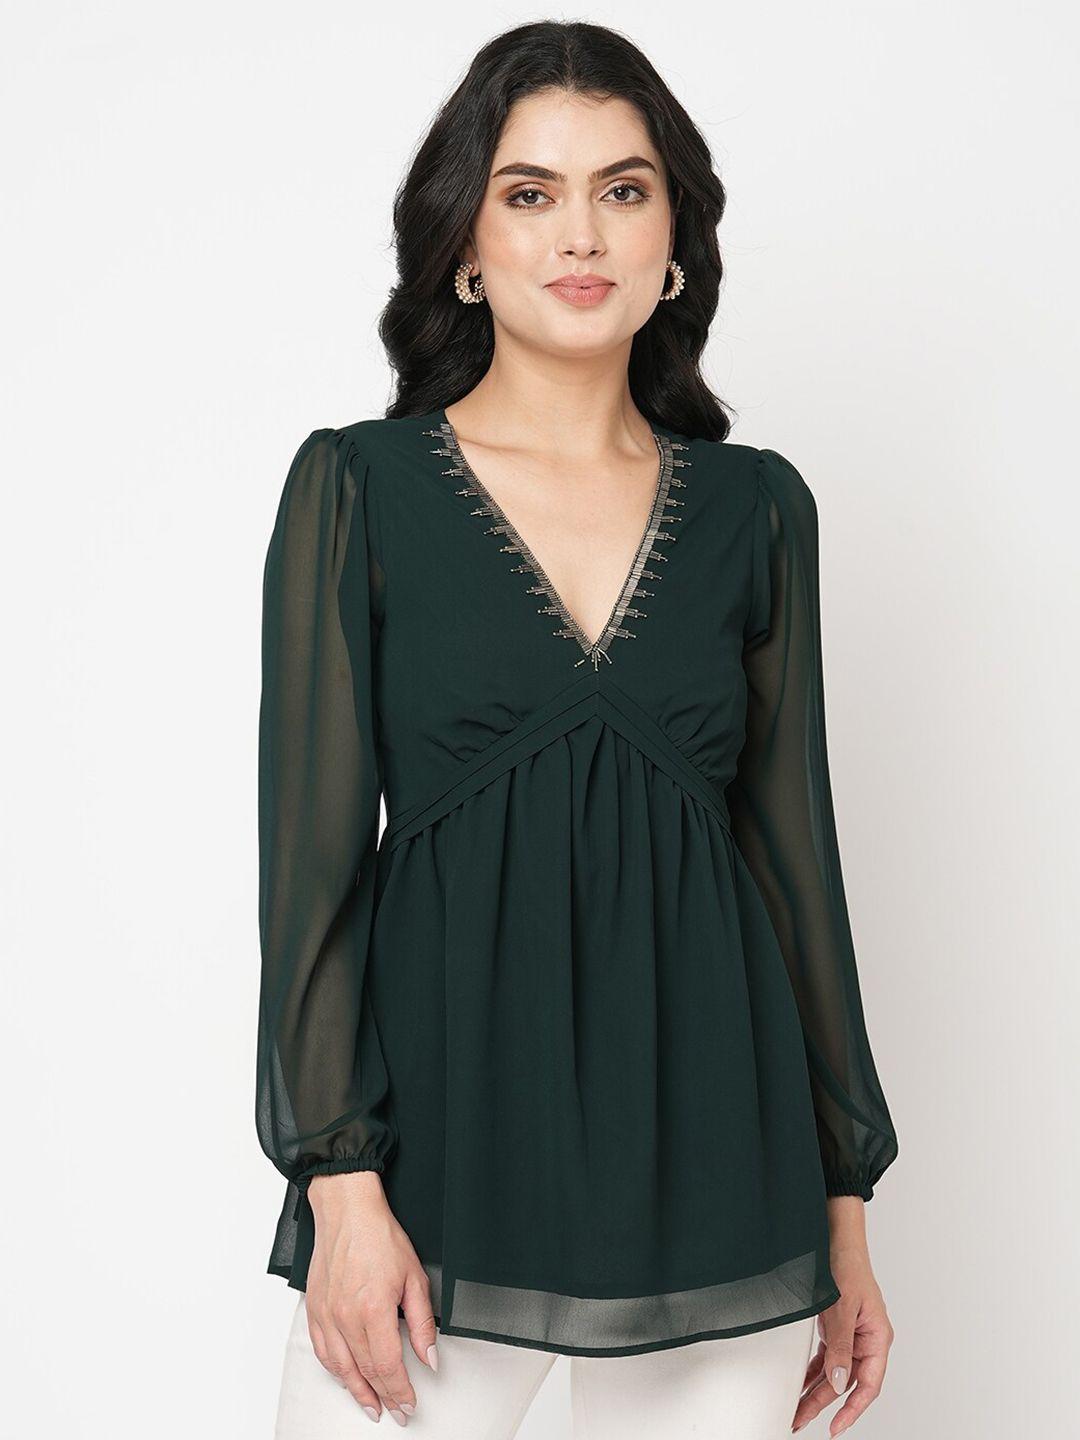 mish green embroidered v-neck cuffed sleeves top